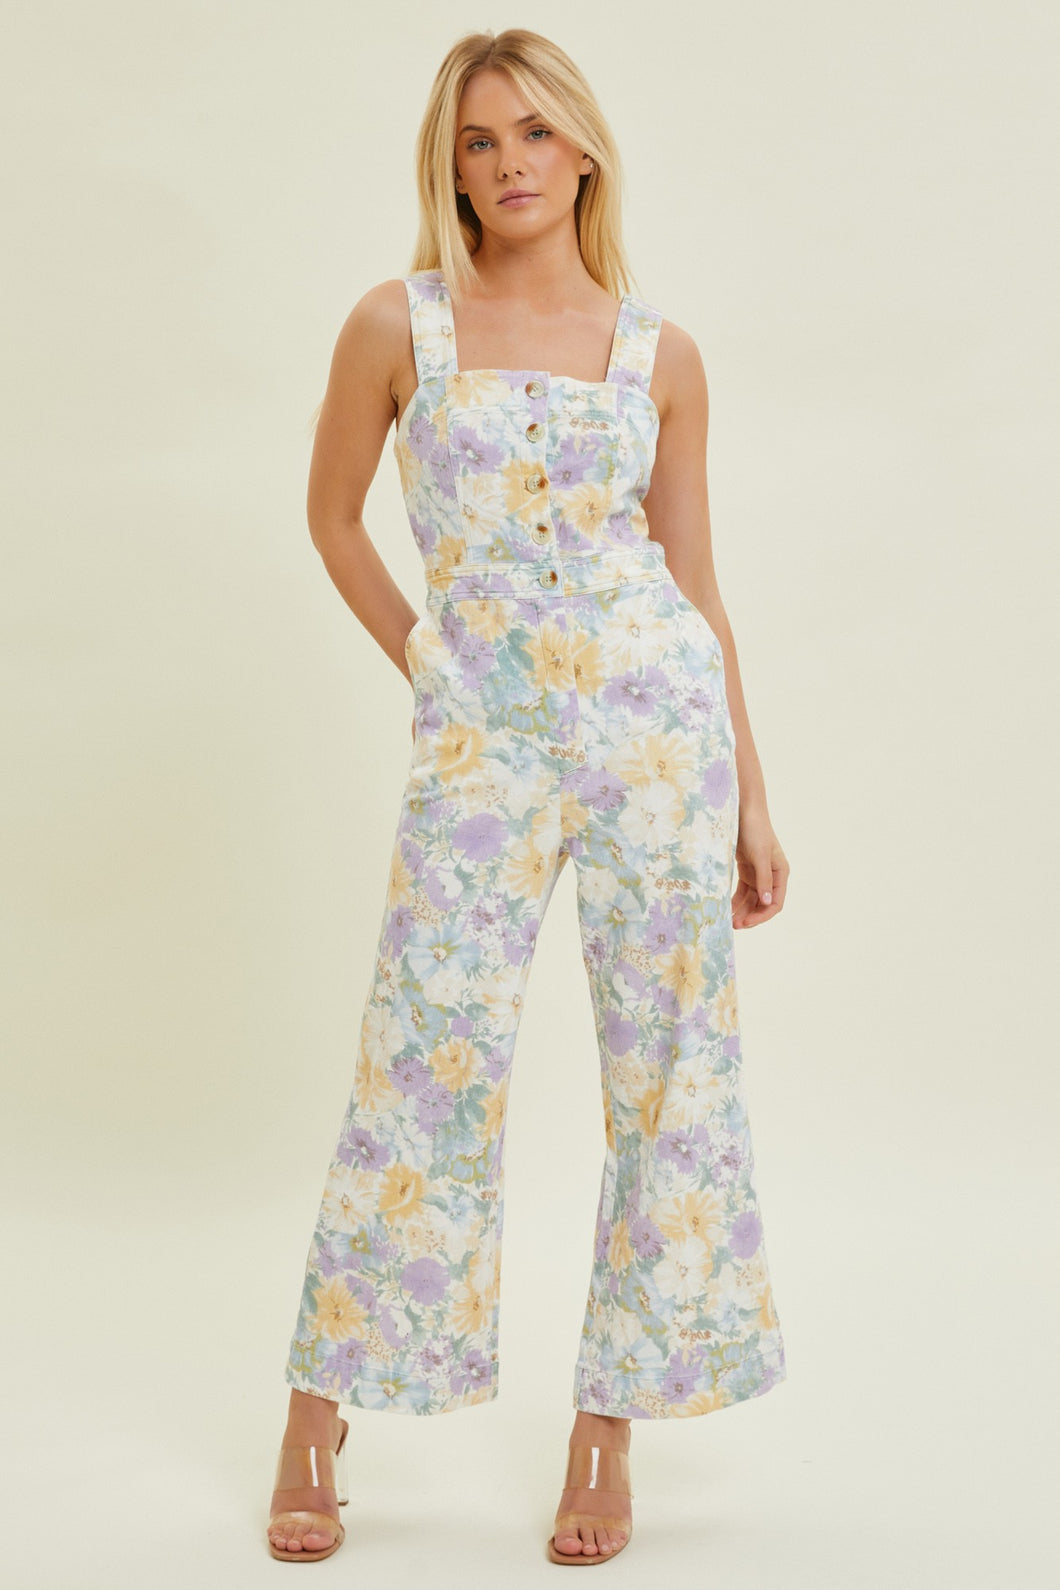 BAE Floral Overalls